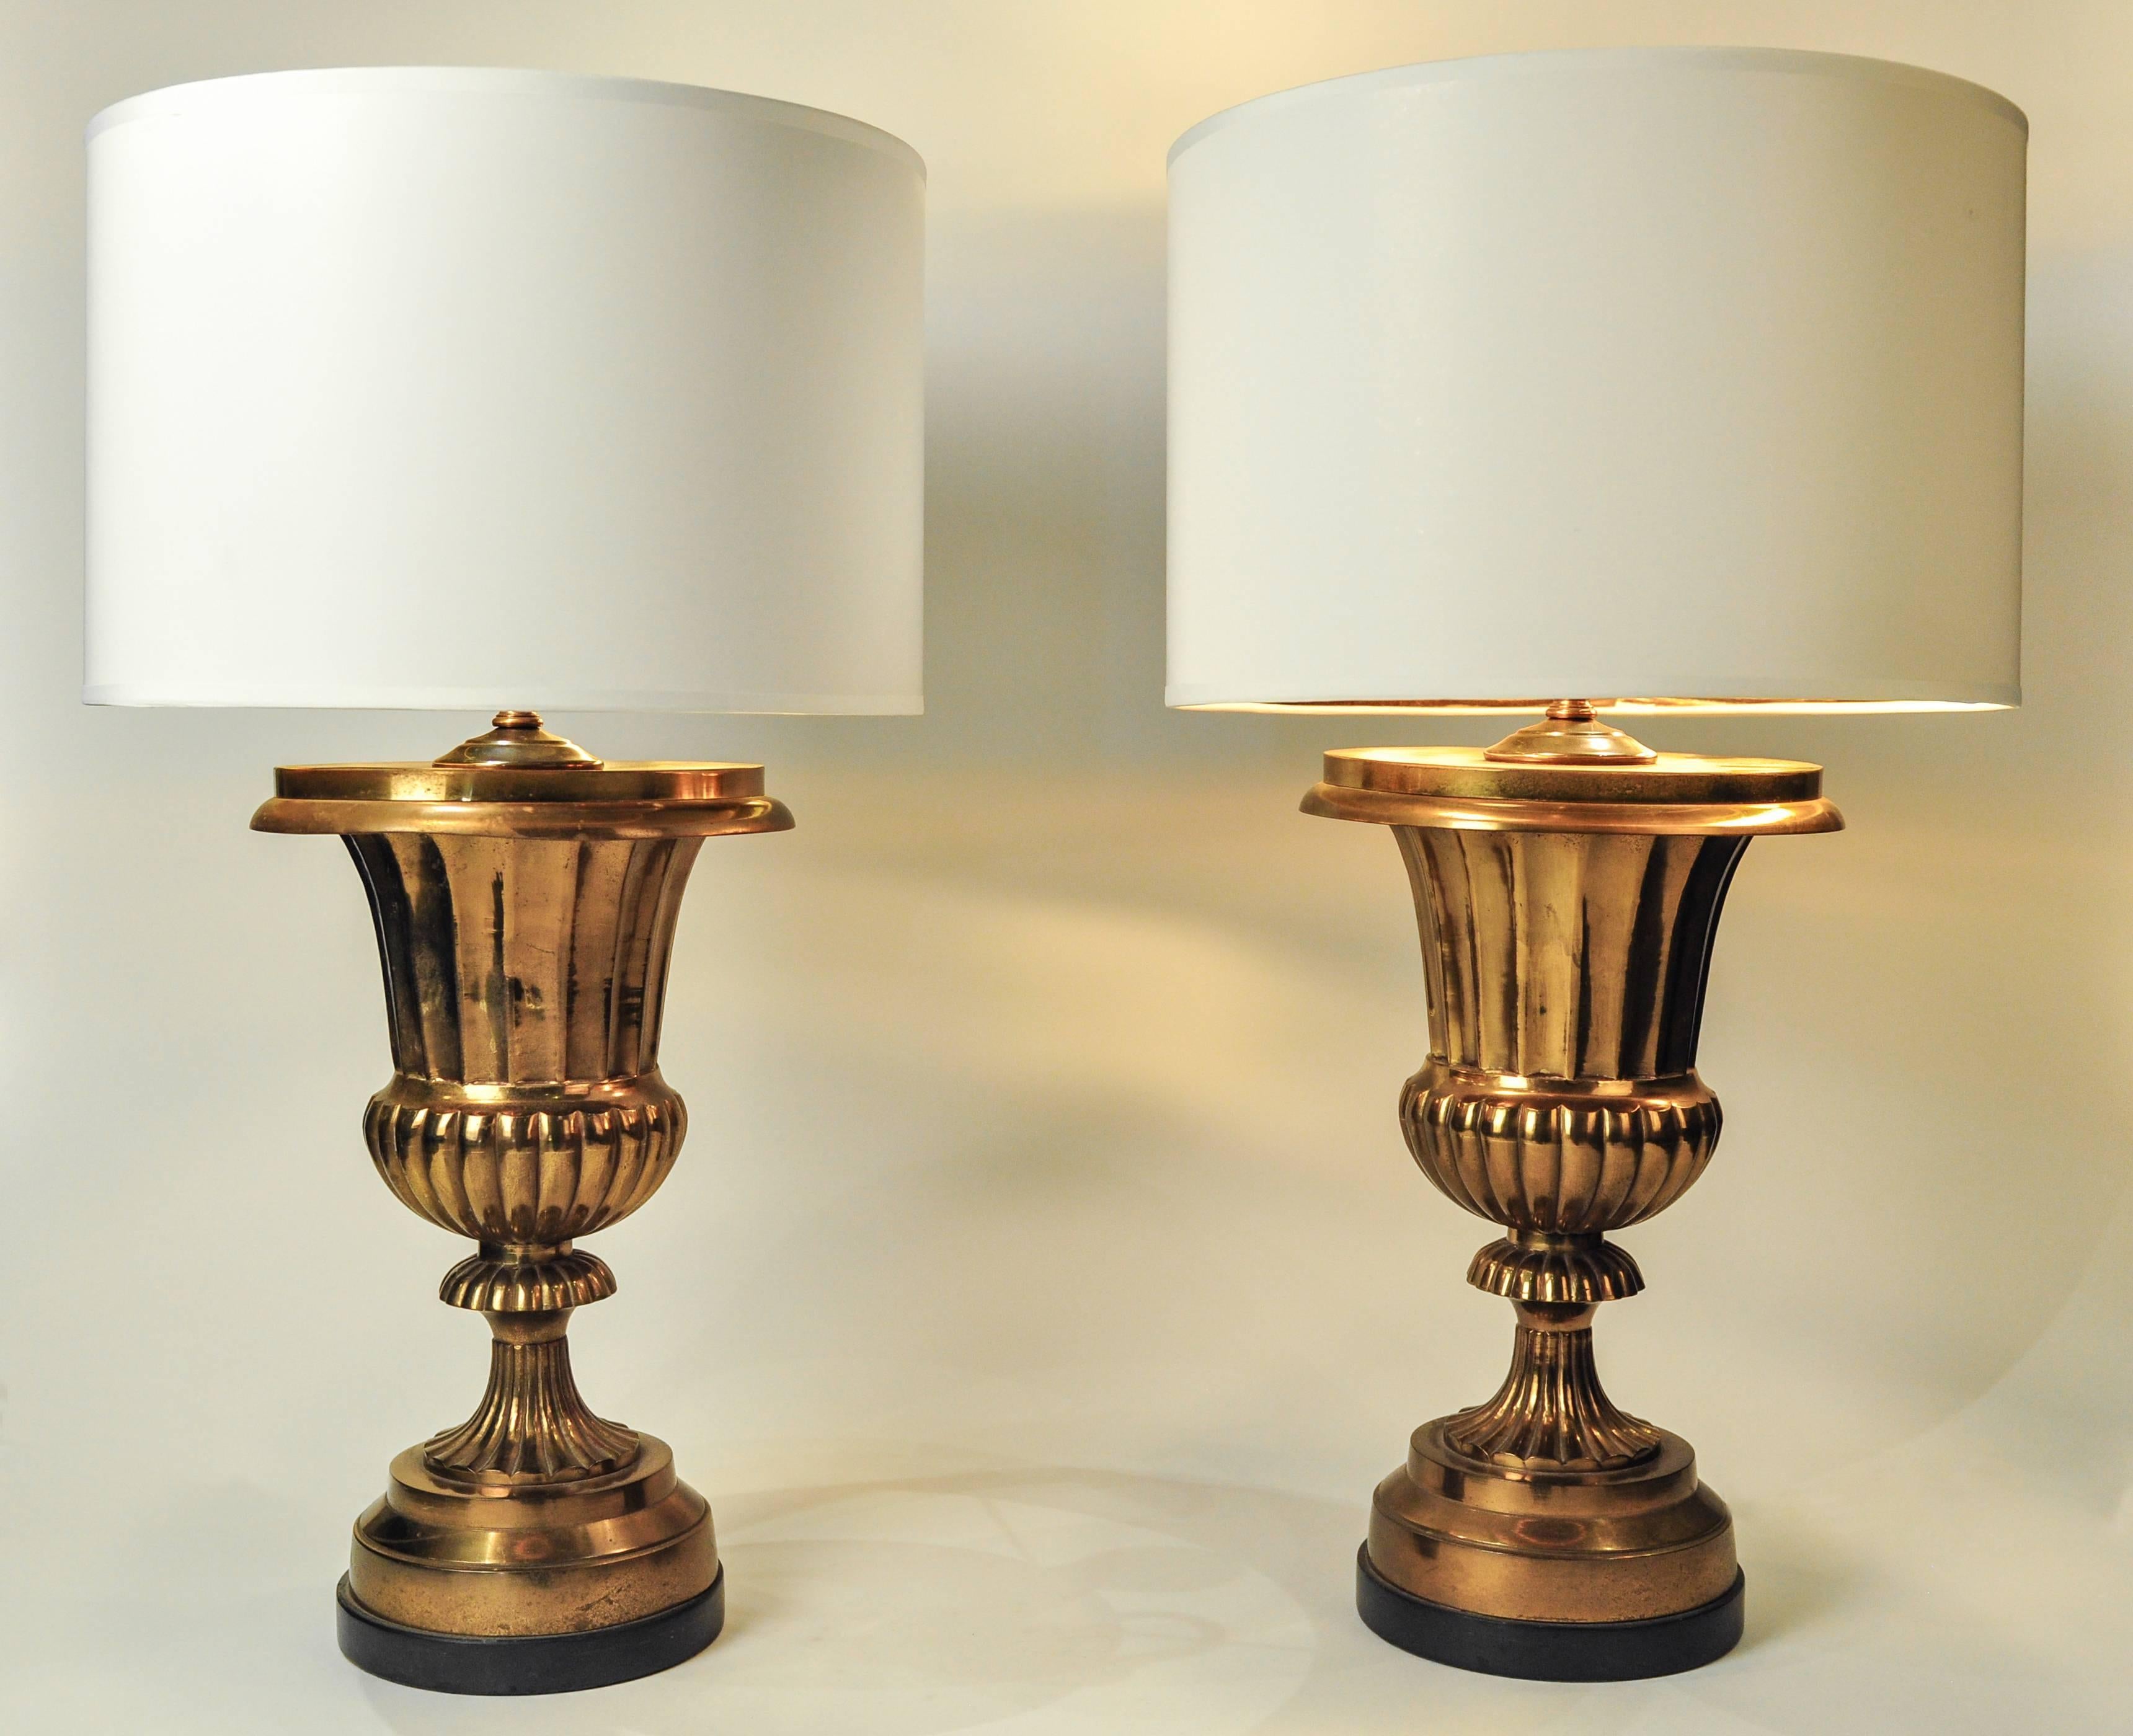 Vintage pair of solid brass task or table lamps with wood base. Excellent working condition and no special light bulbs required. These lamps are just beautiful and would bring a great addition to any space. Each lamp comes with a white exterior drum